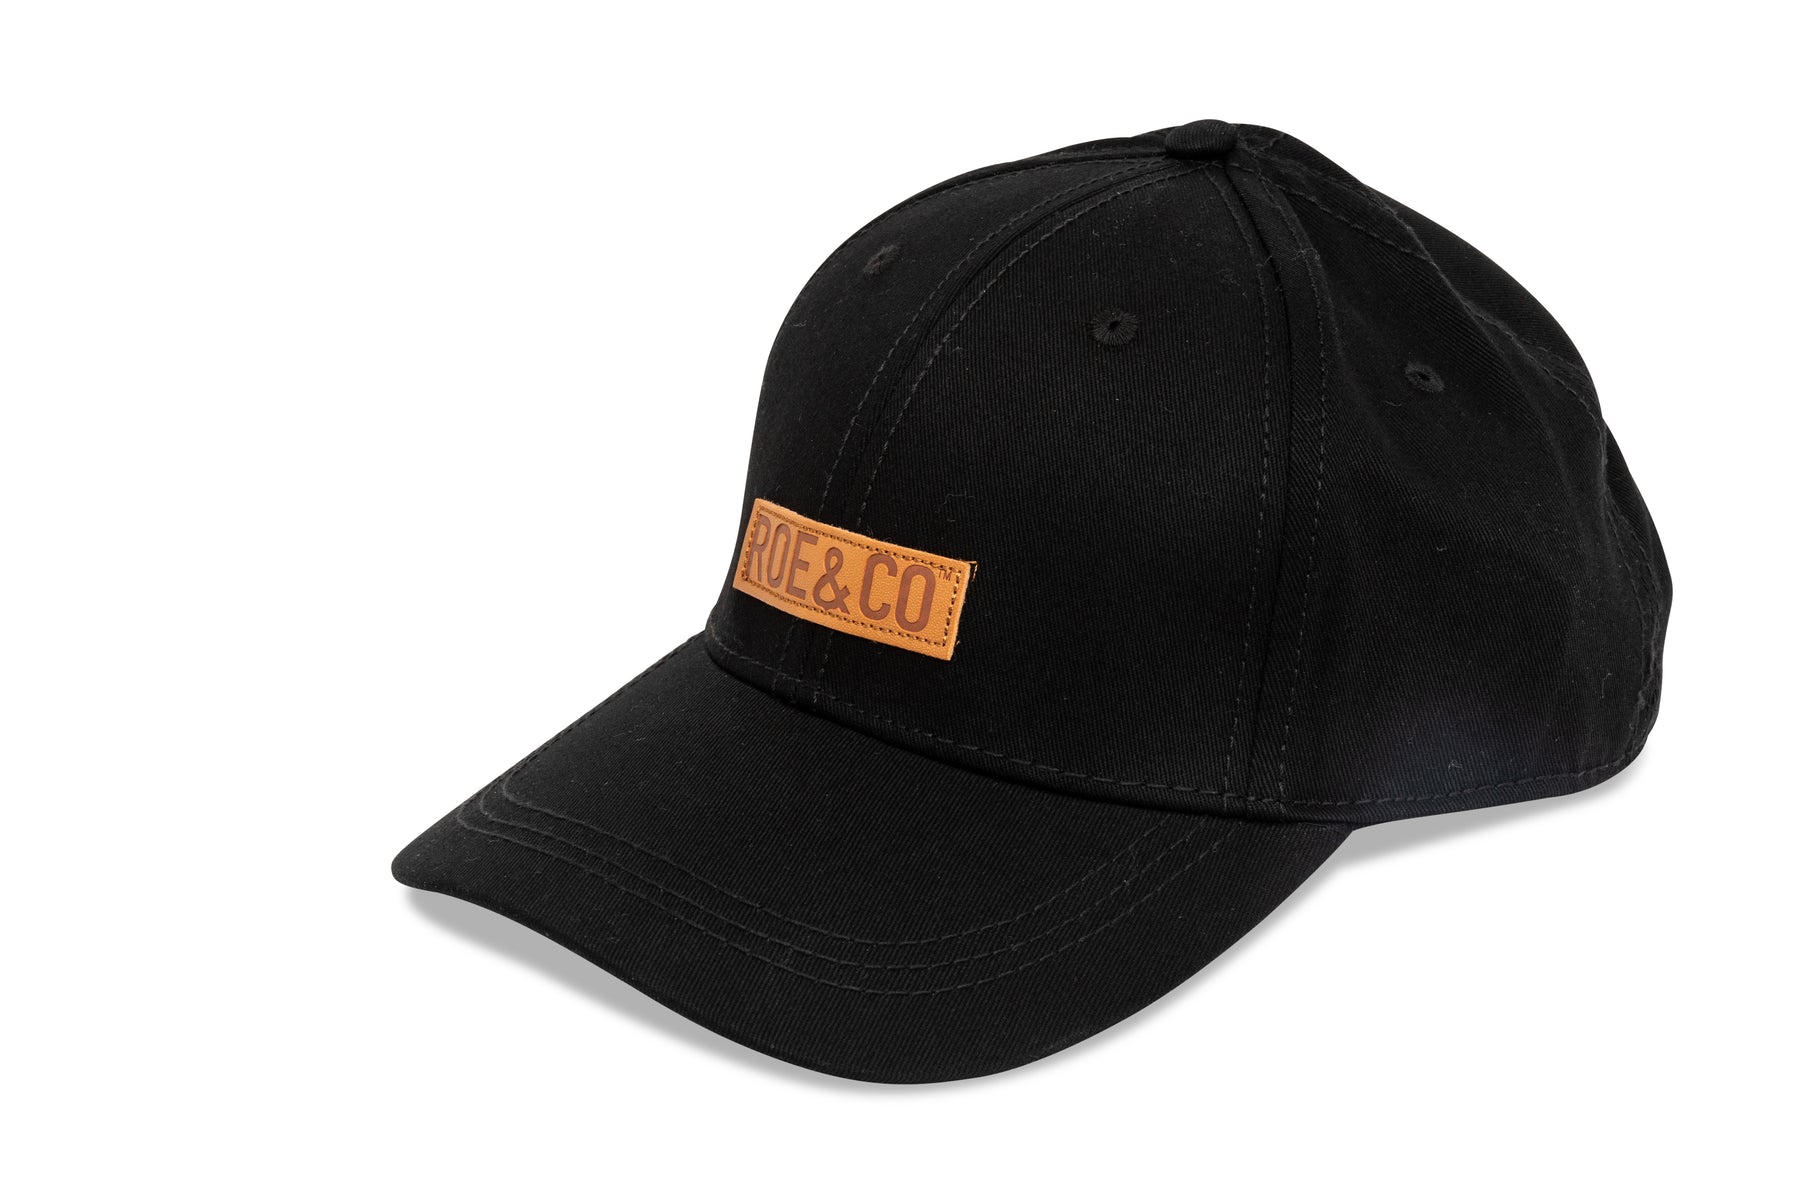 Roe & Co Black Cap with Leather Patch